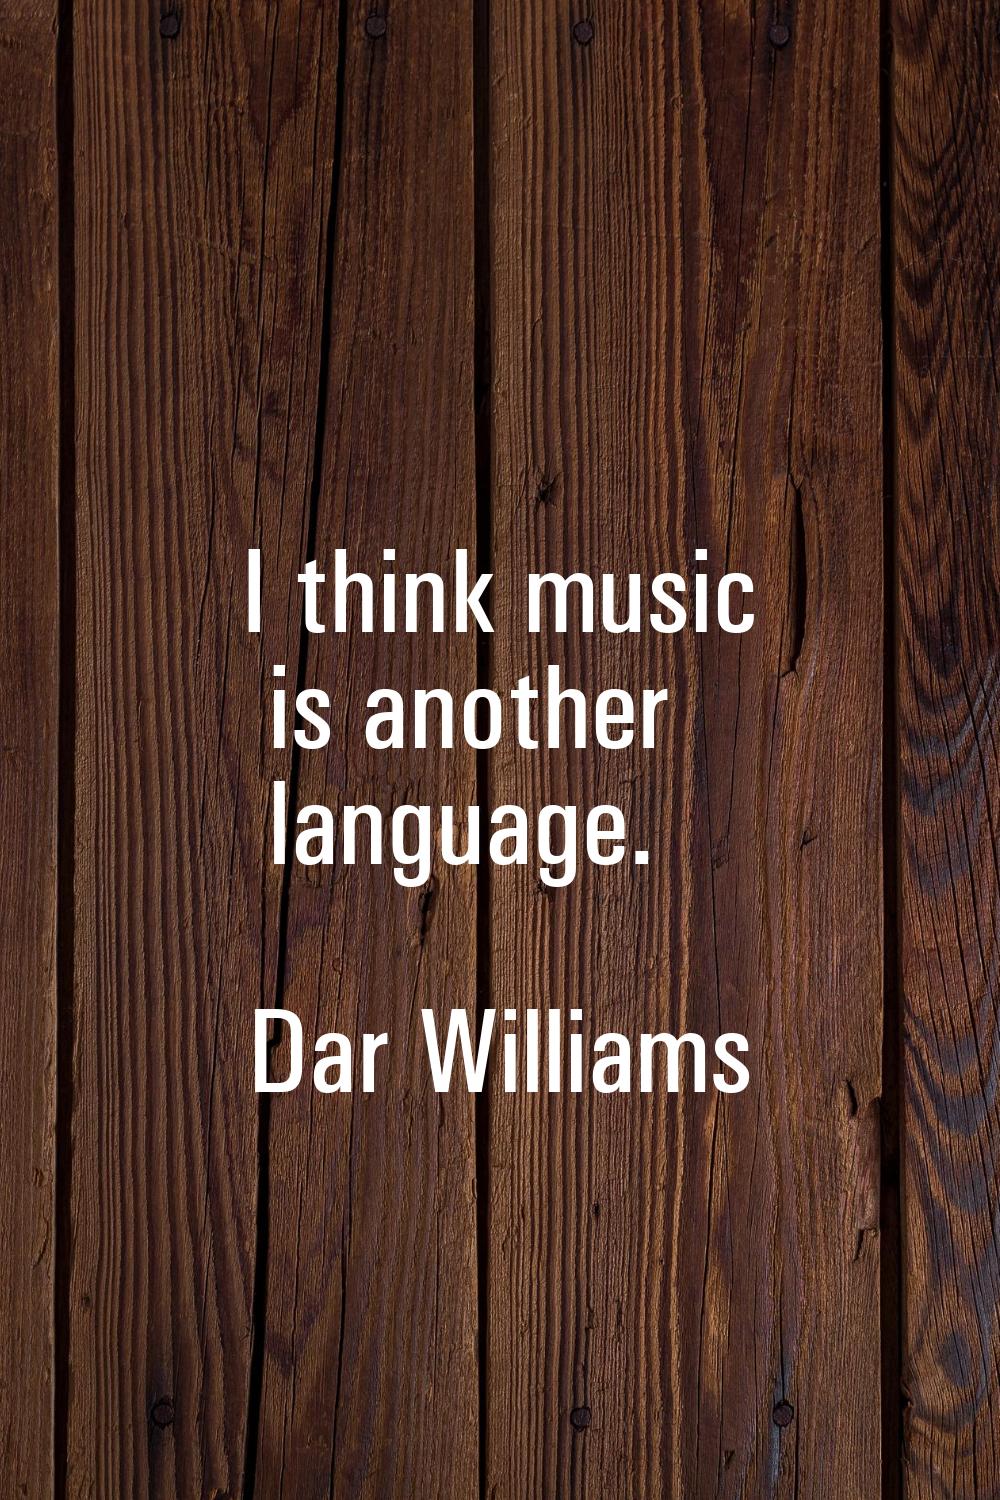 I think music is another language.